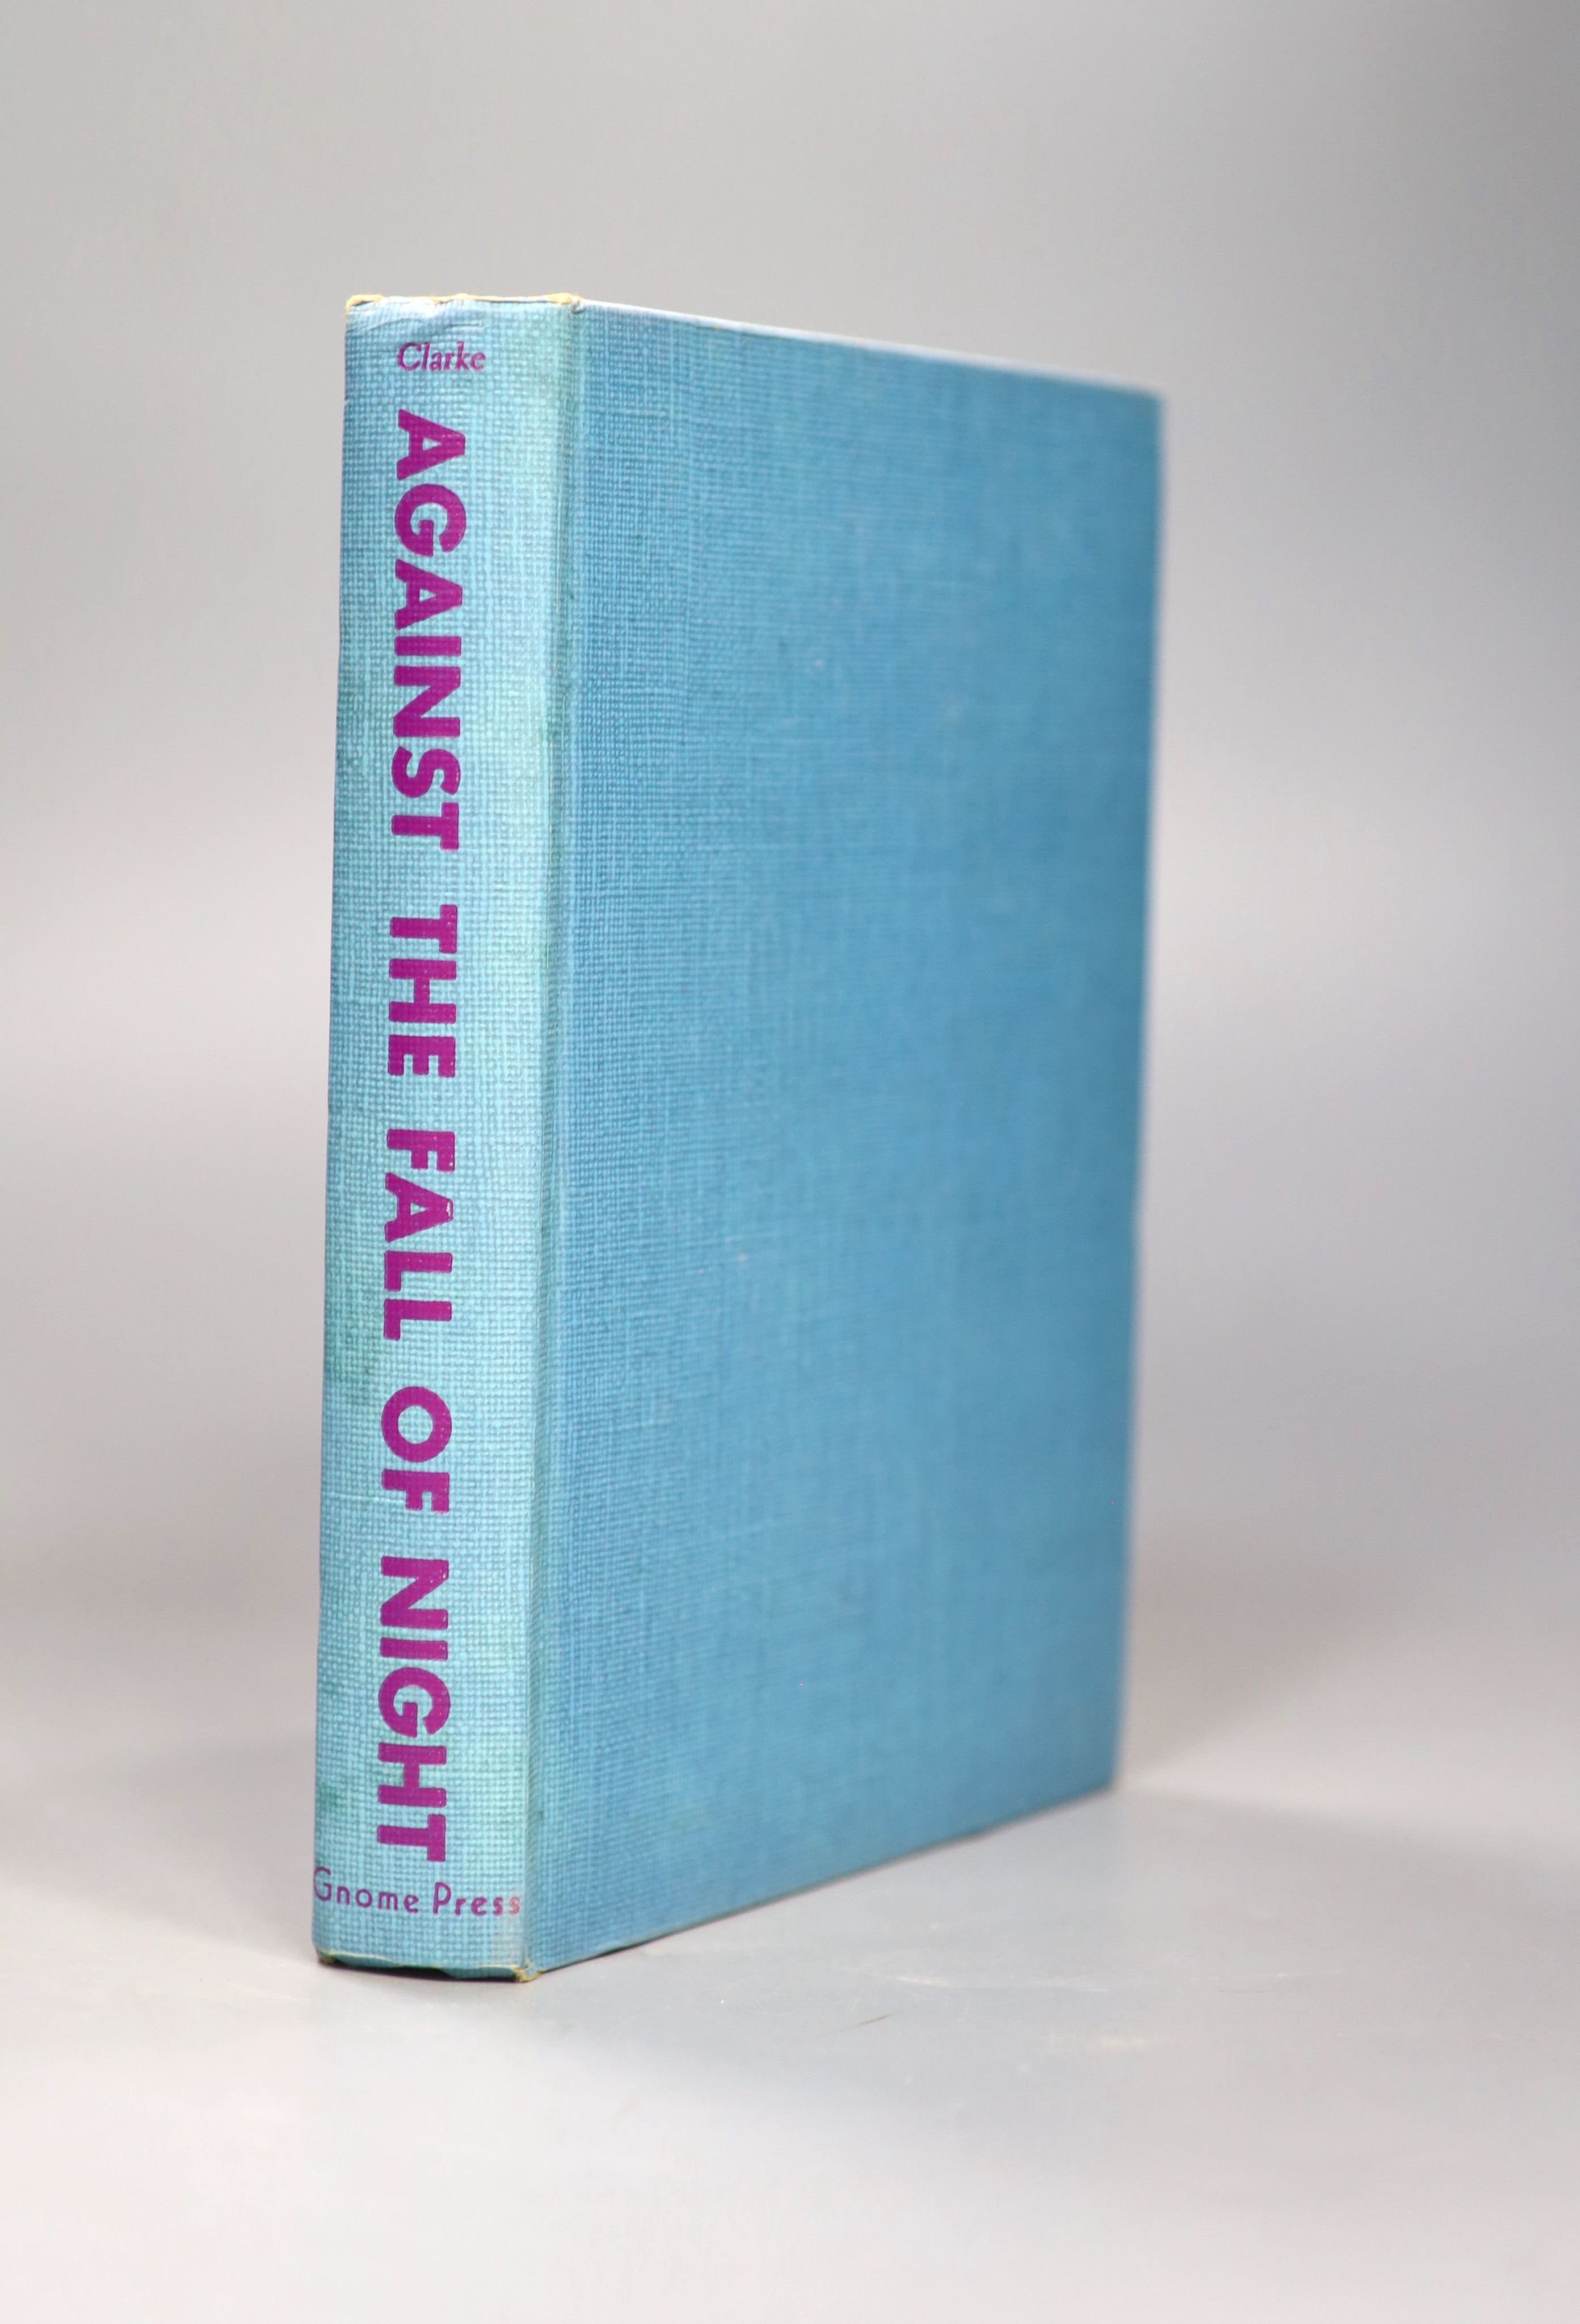 Clarke, Arthur C - Against the Fall of Night, 1st edition, blue cloth, with unclipped d/j, with nicks to spine head and foot, Gnome Press, New York, 1953